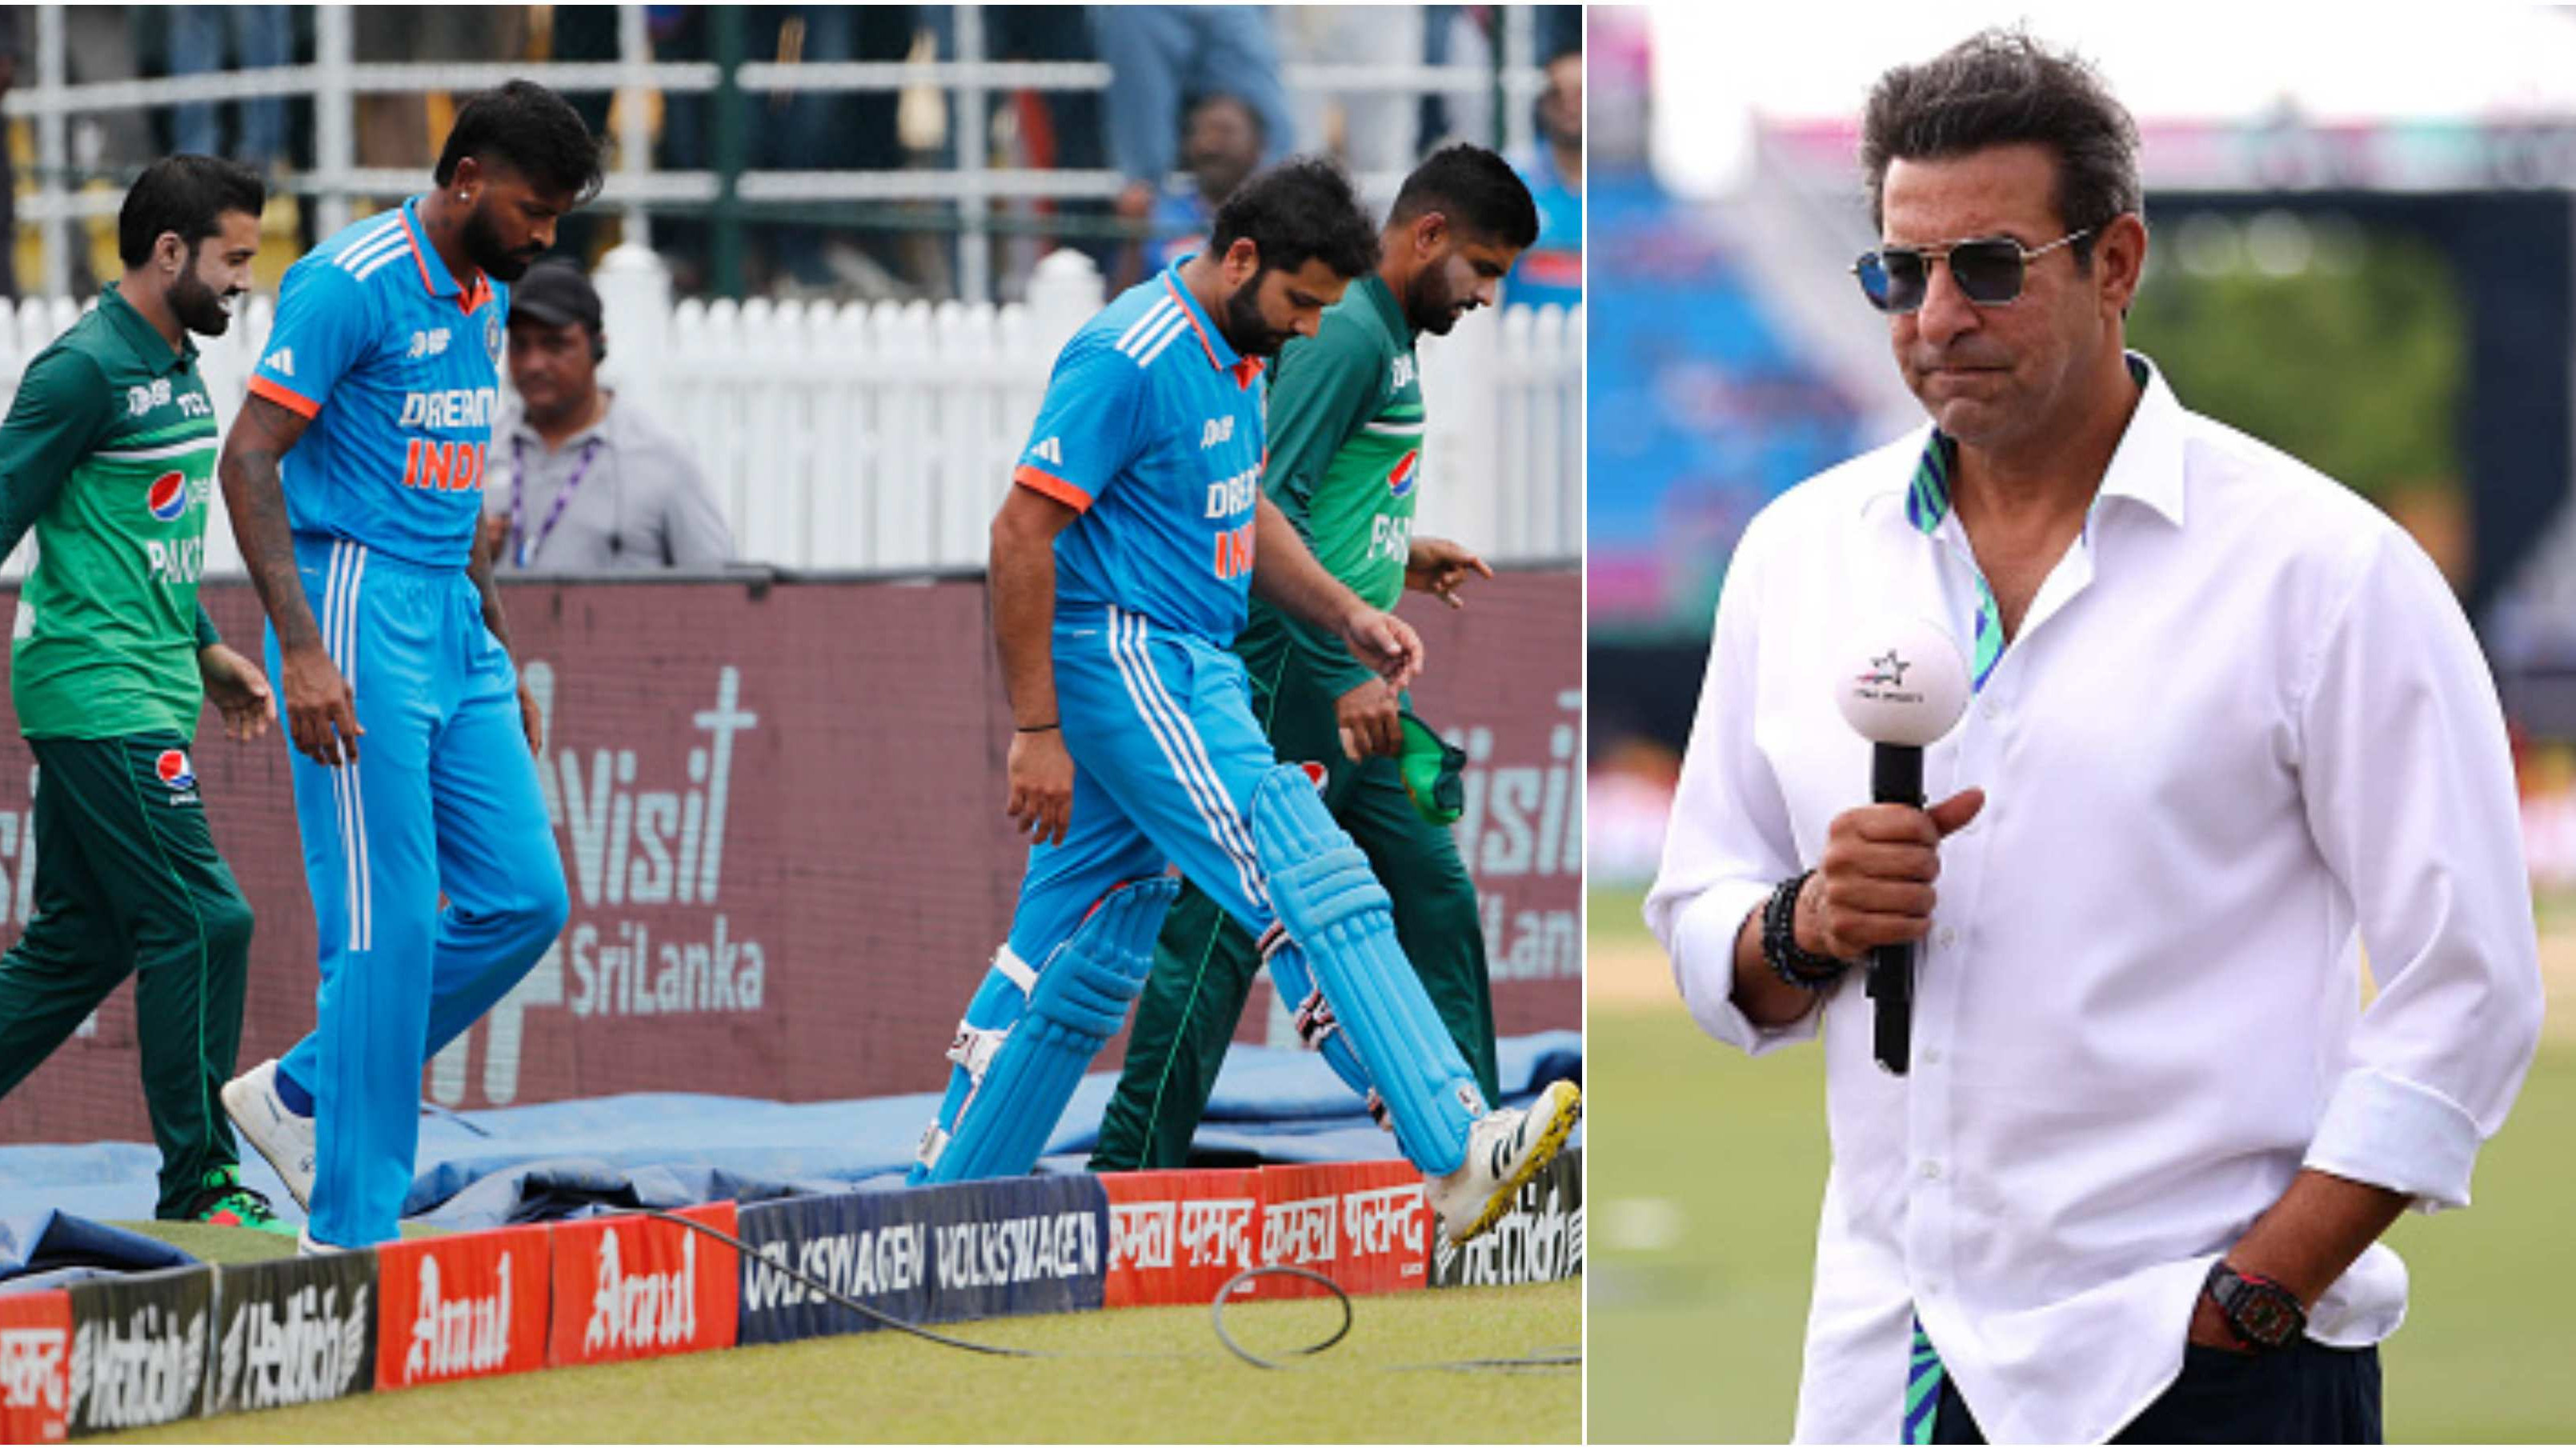 “We will welcome them in splendid fashion”: Wasim Akram hopes India will travel to Pakistan for 2025 Champions Trophy